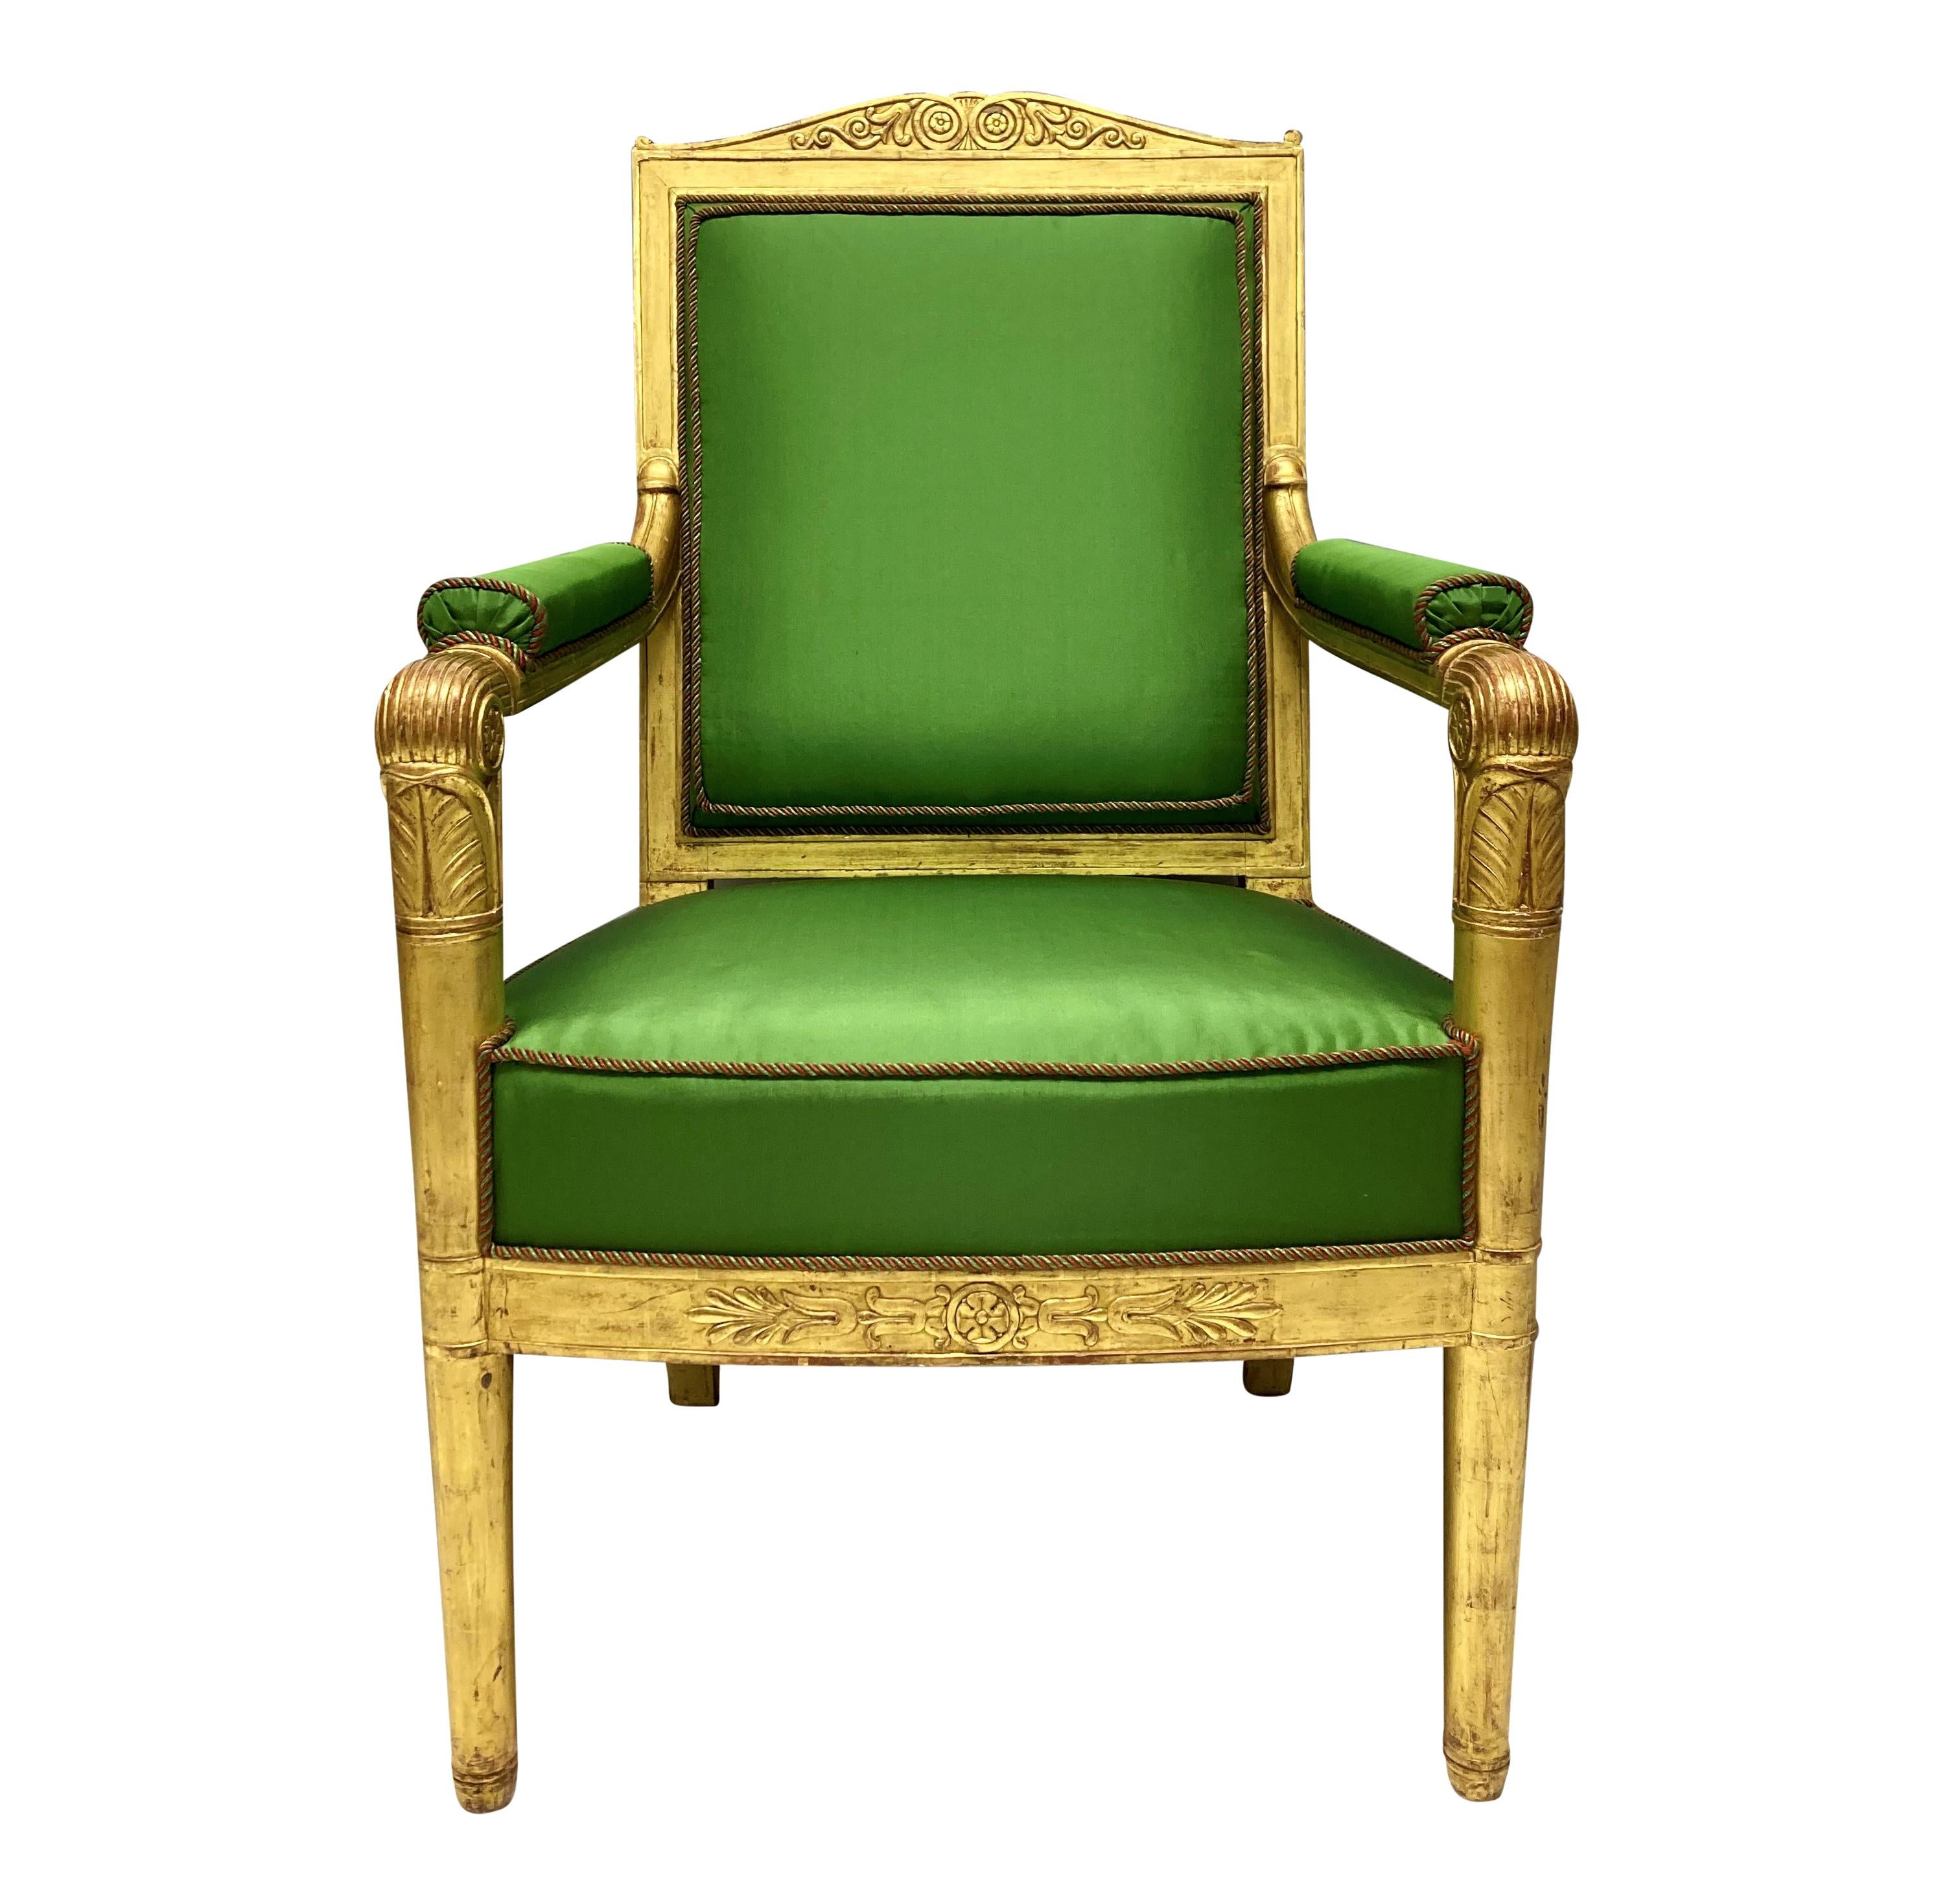 A fine pair of French Empire style armchairs, carved and water gilded with burnishing. Upholstered in apple green silk with rope piping and horsehair.

These chairs and the matching en-suite canape (sold separately) came from a Parisien apartment.